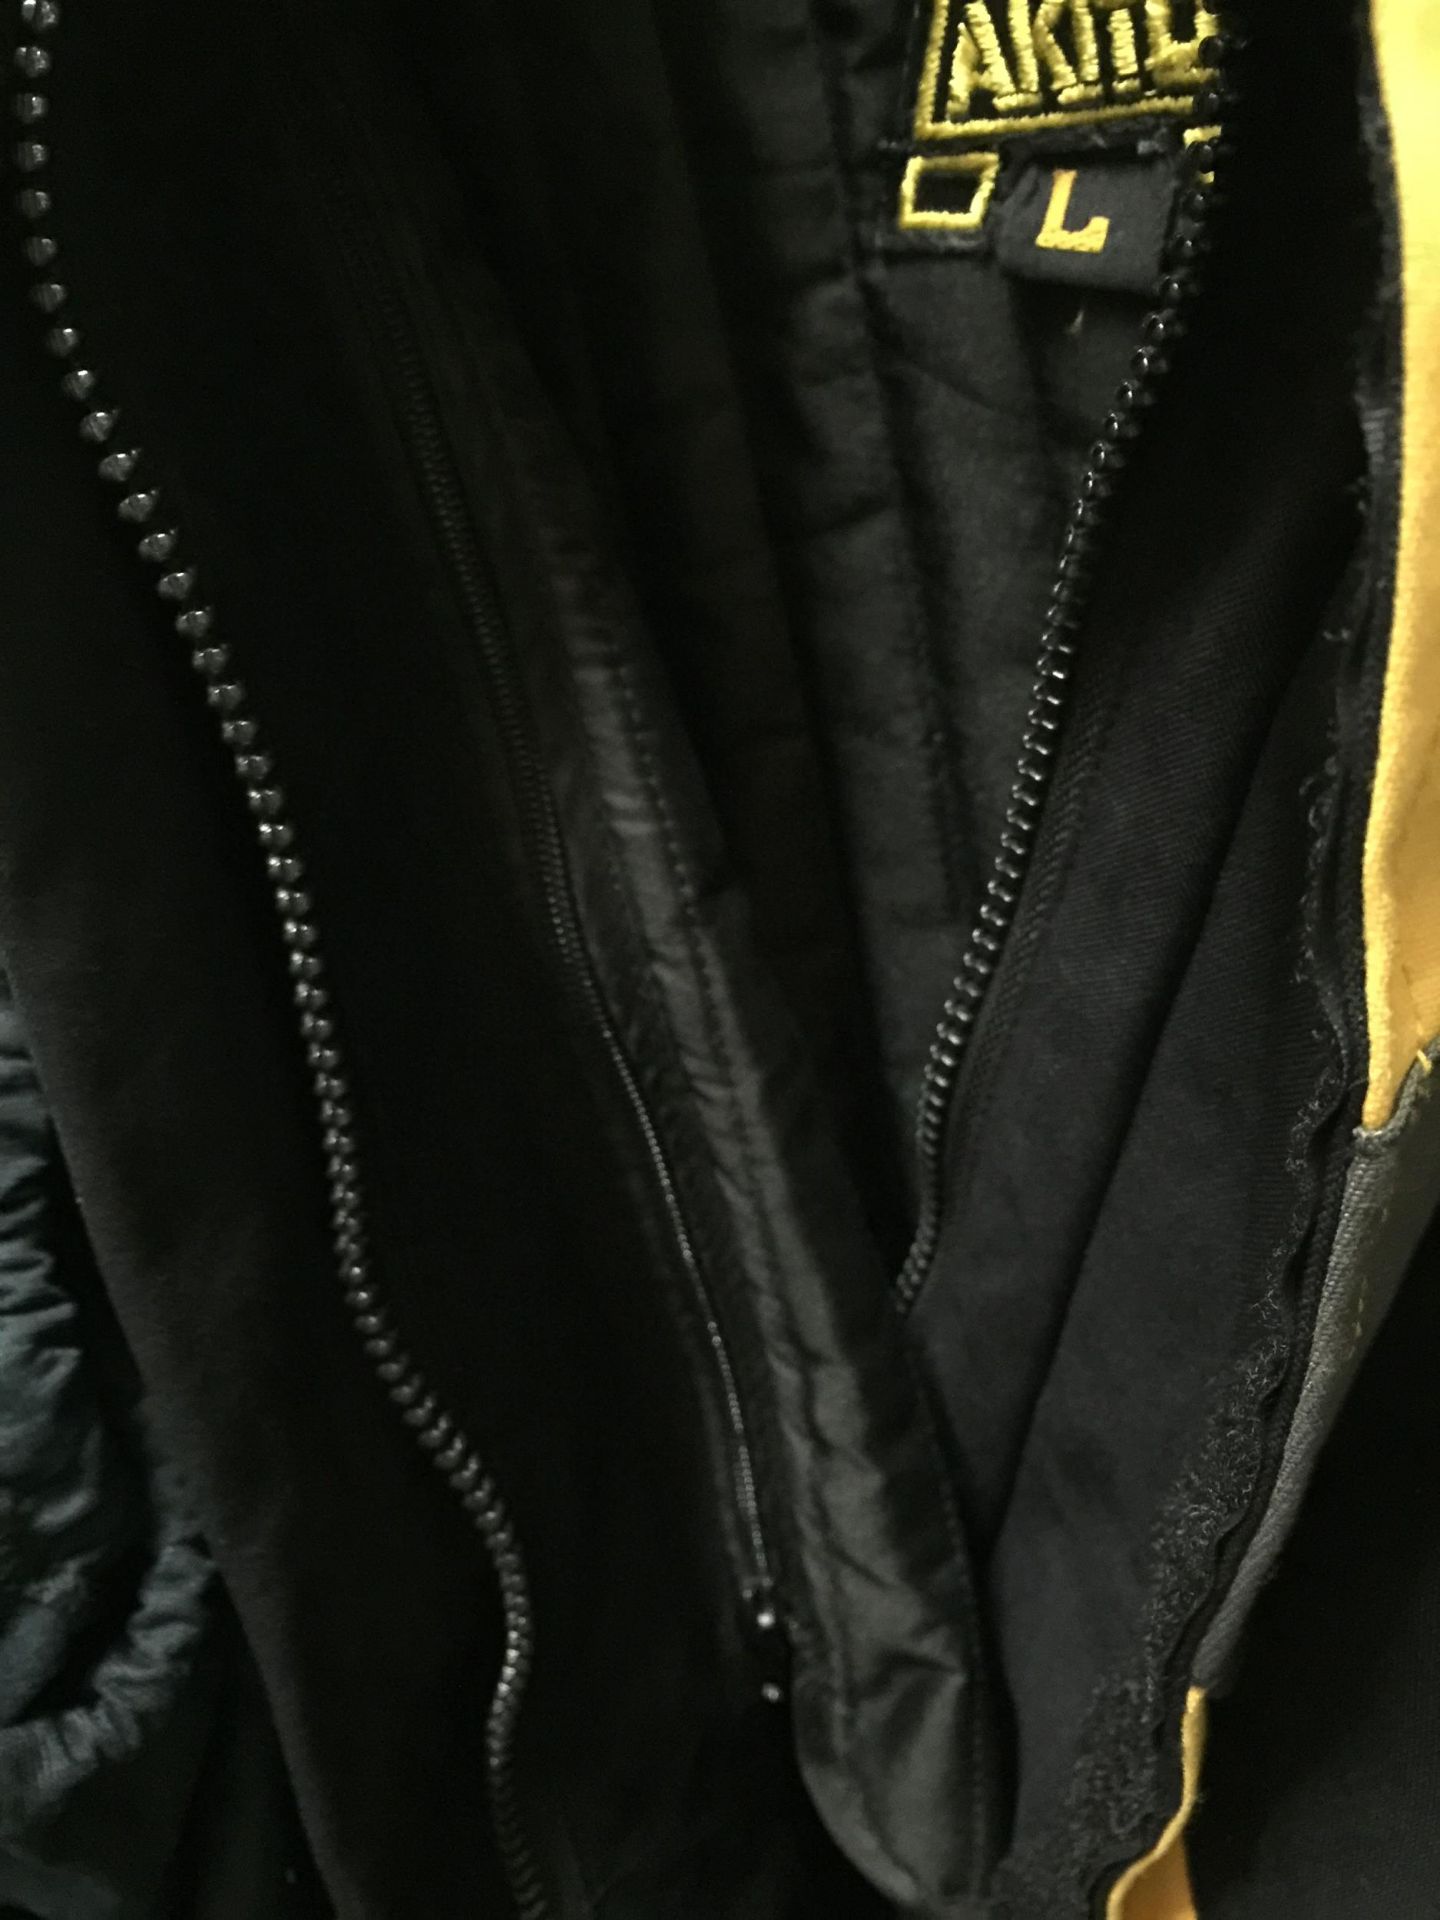 A MOTORCYCLING JACKET SIZE L IN BLACK AND YELLOW - Image 3 of 4